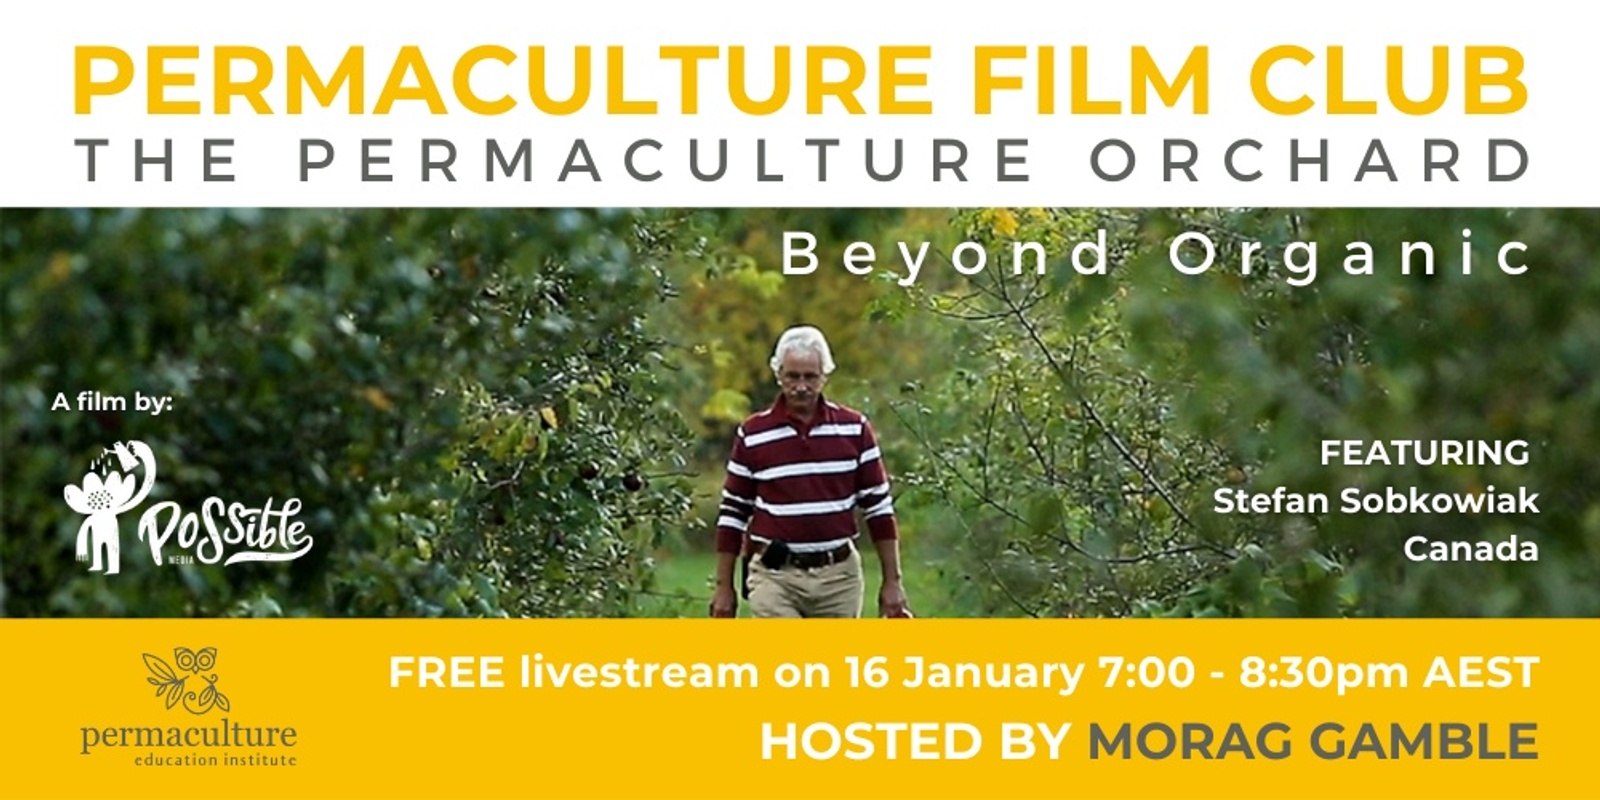 Banner image for MORAG'S PERMACULTURE FILM CLUB: The Permaculture Orchard: Beyond Organic